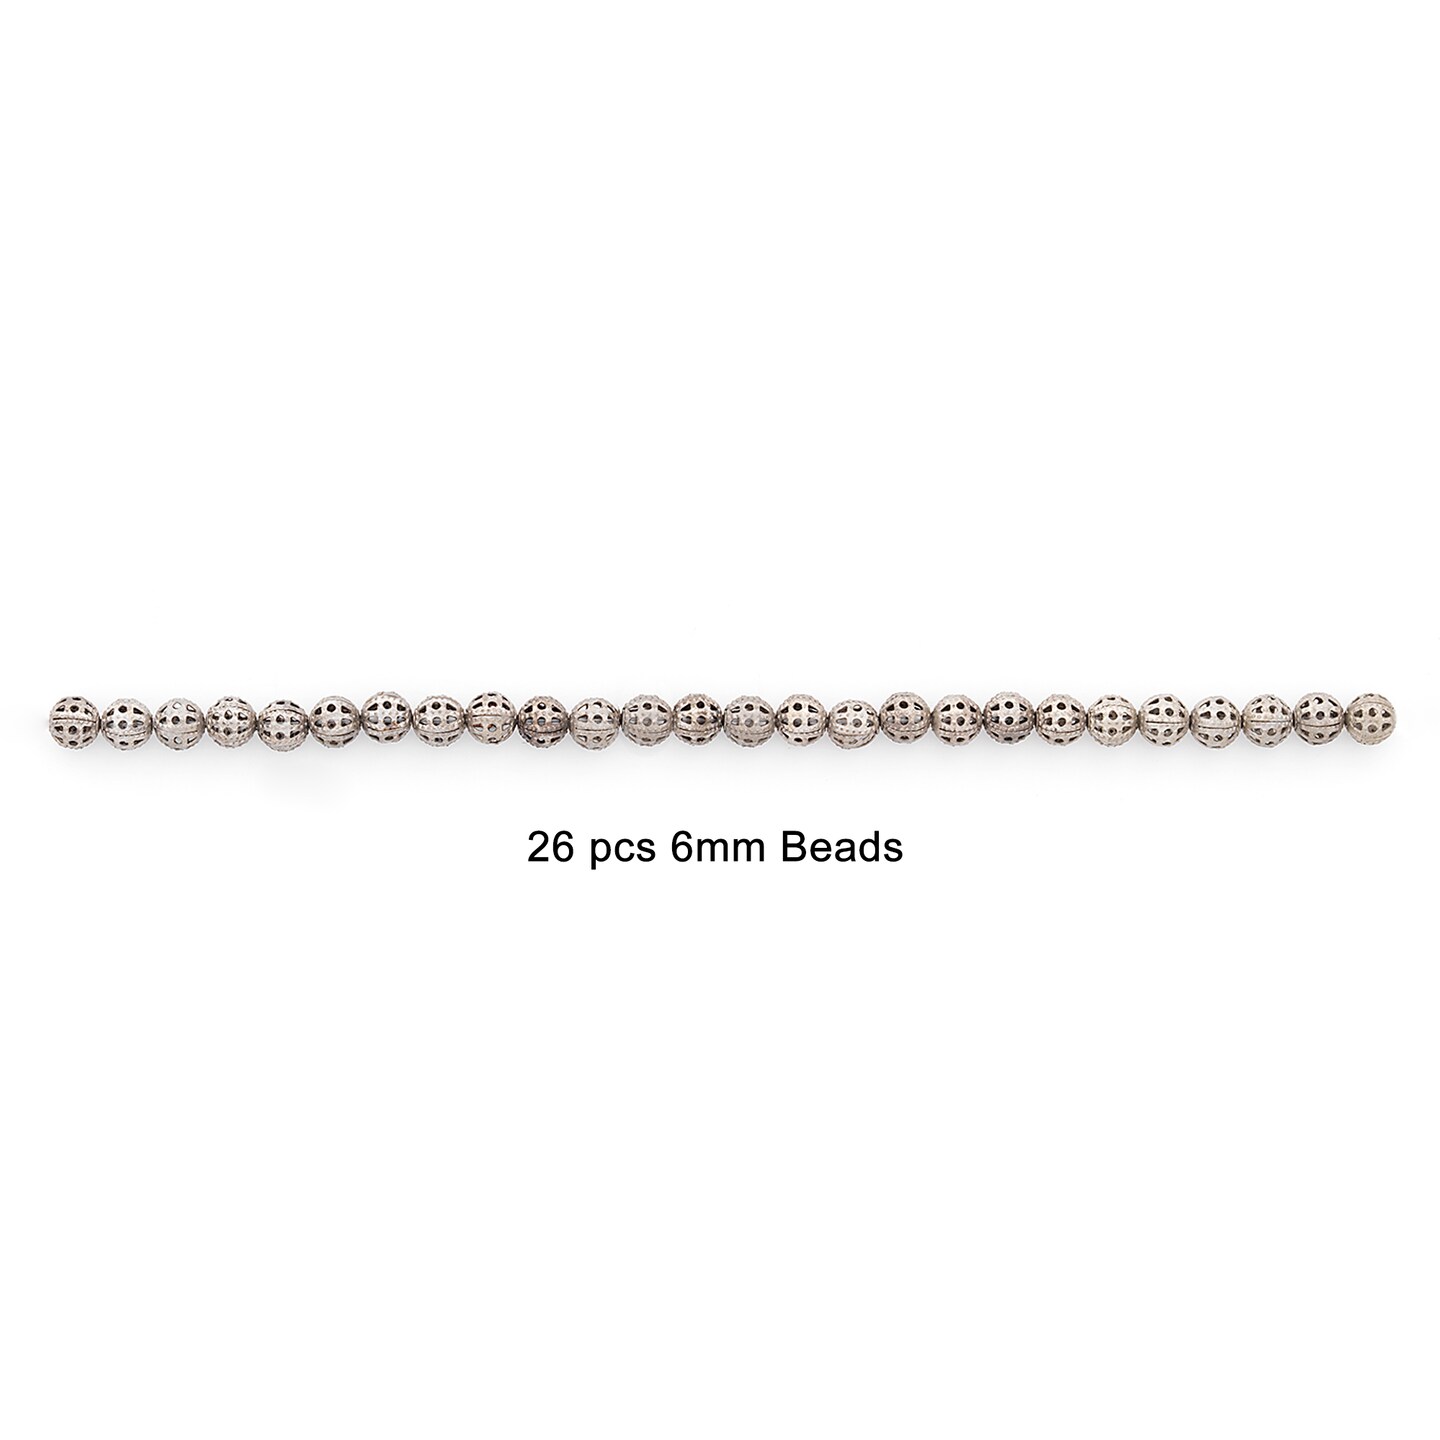 Filigree Metal 6mm Beads Pack of 26  - Antique Silver